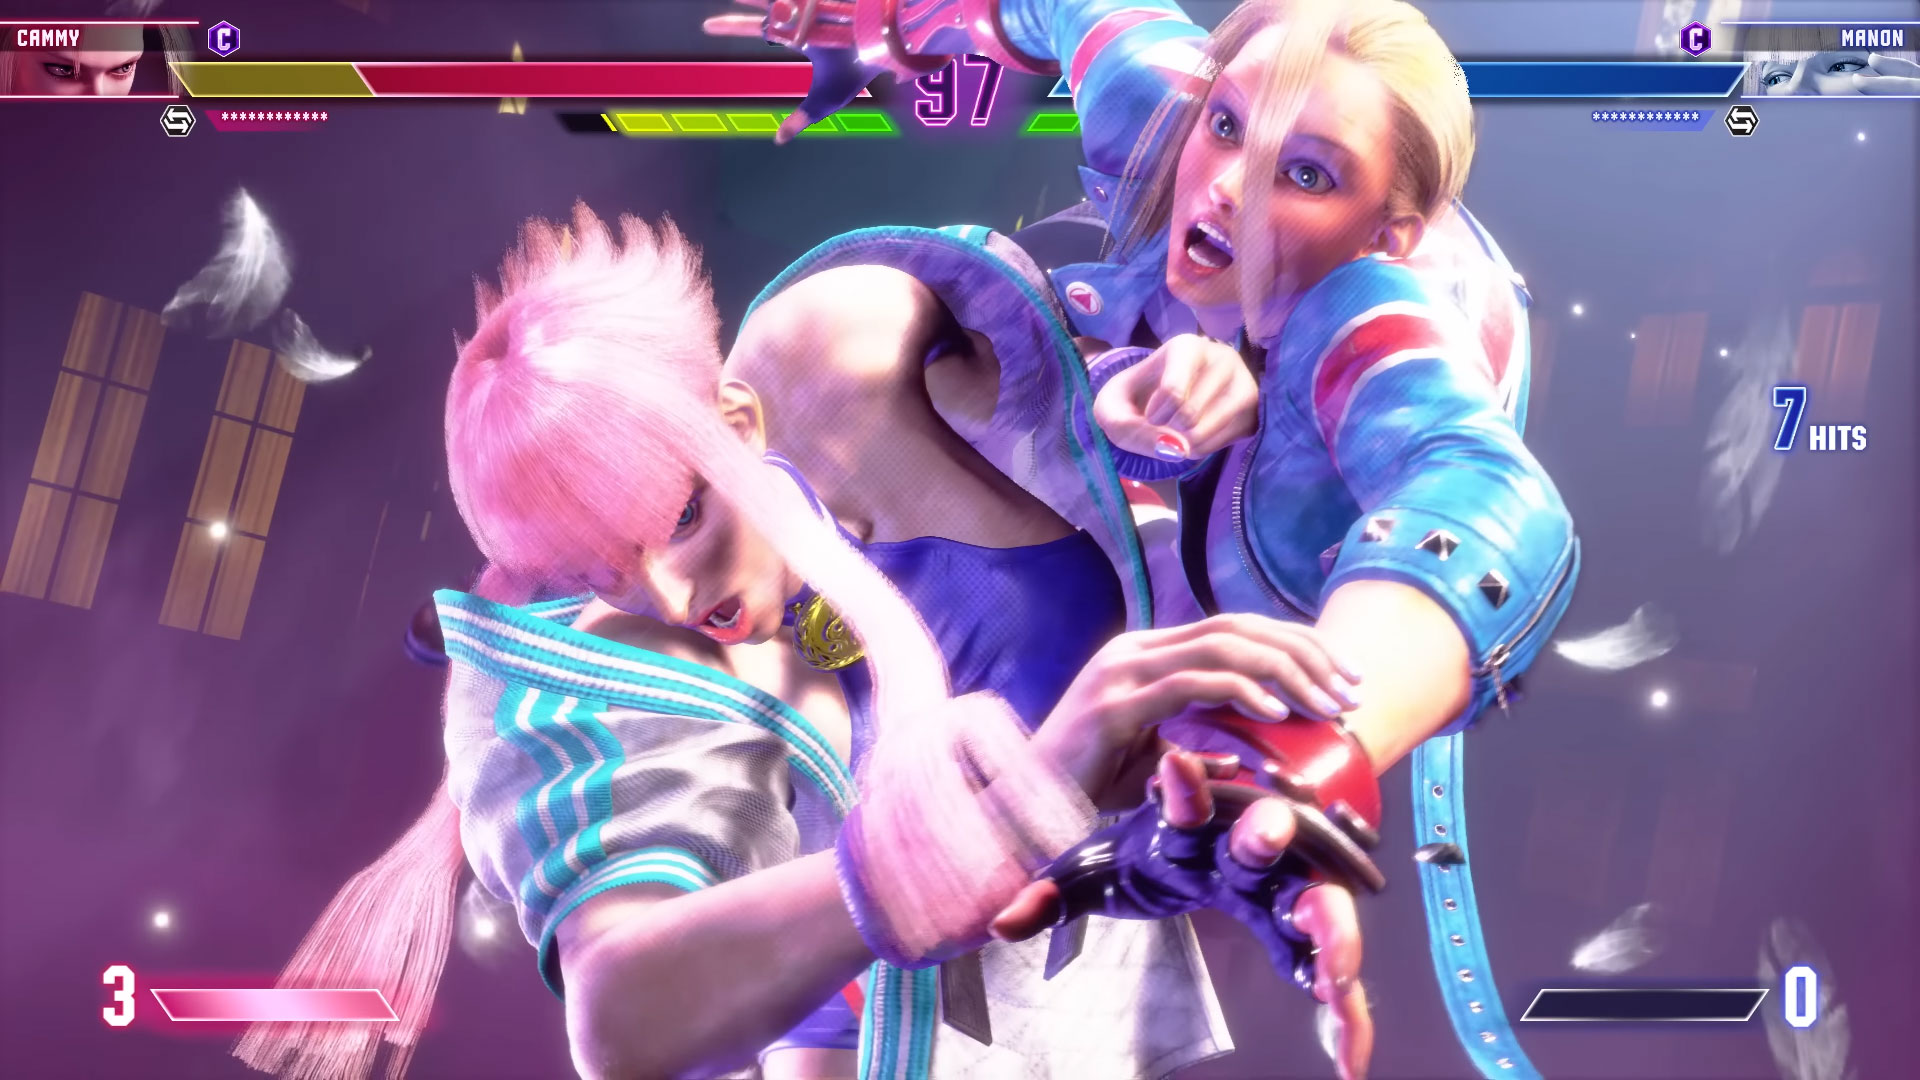 Watch Cammy And Manon Duke It Out In New Street Fighter 6 Developer Match